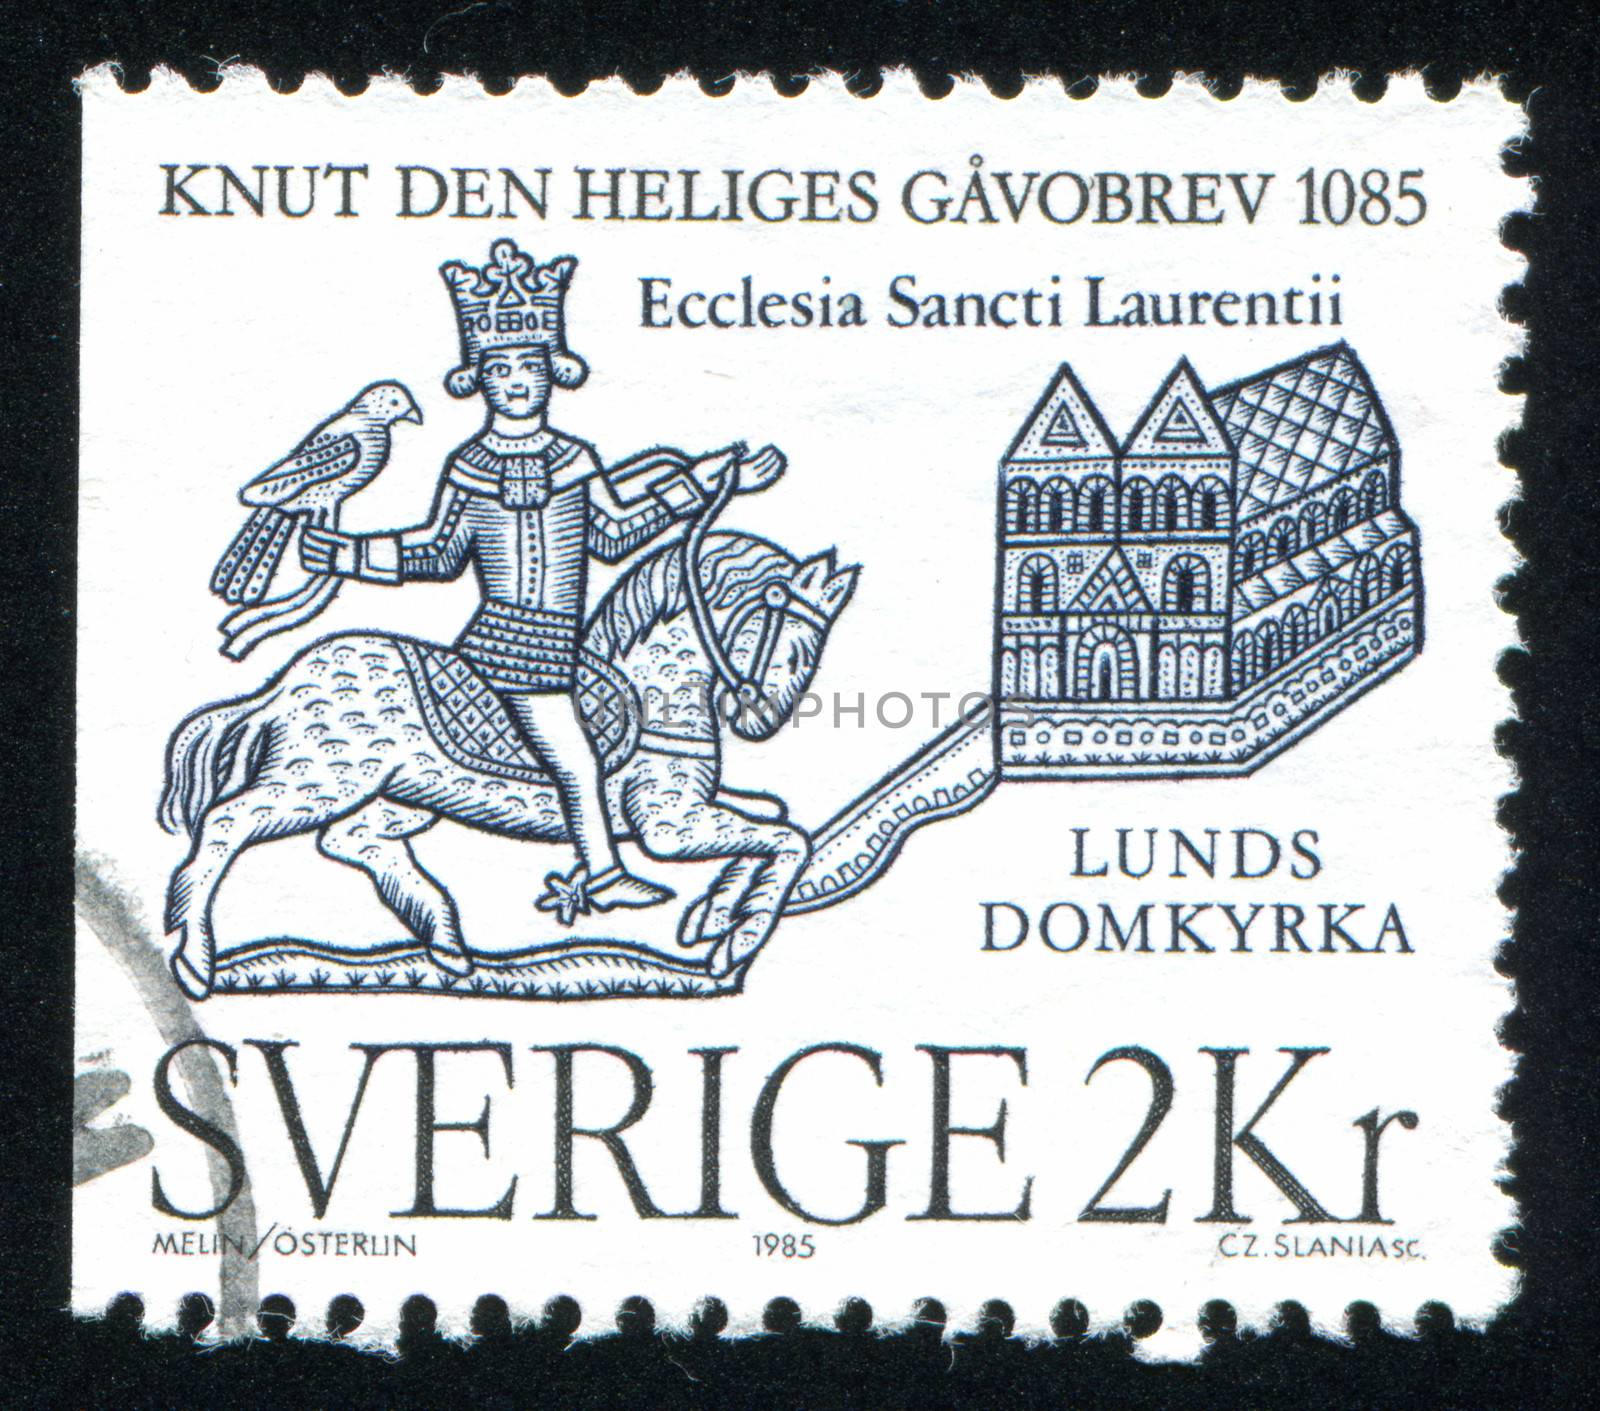 SWEDEN - CIRCA 1985: stamp printed by Sweden, shows Seal of St. Cnut and Lund Cathedral, circa 1985